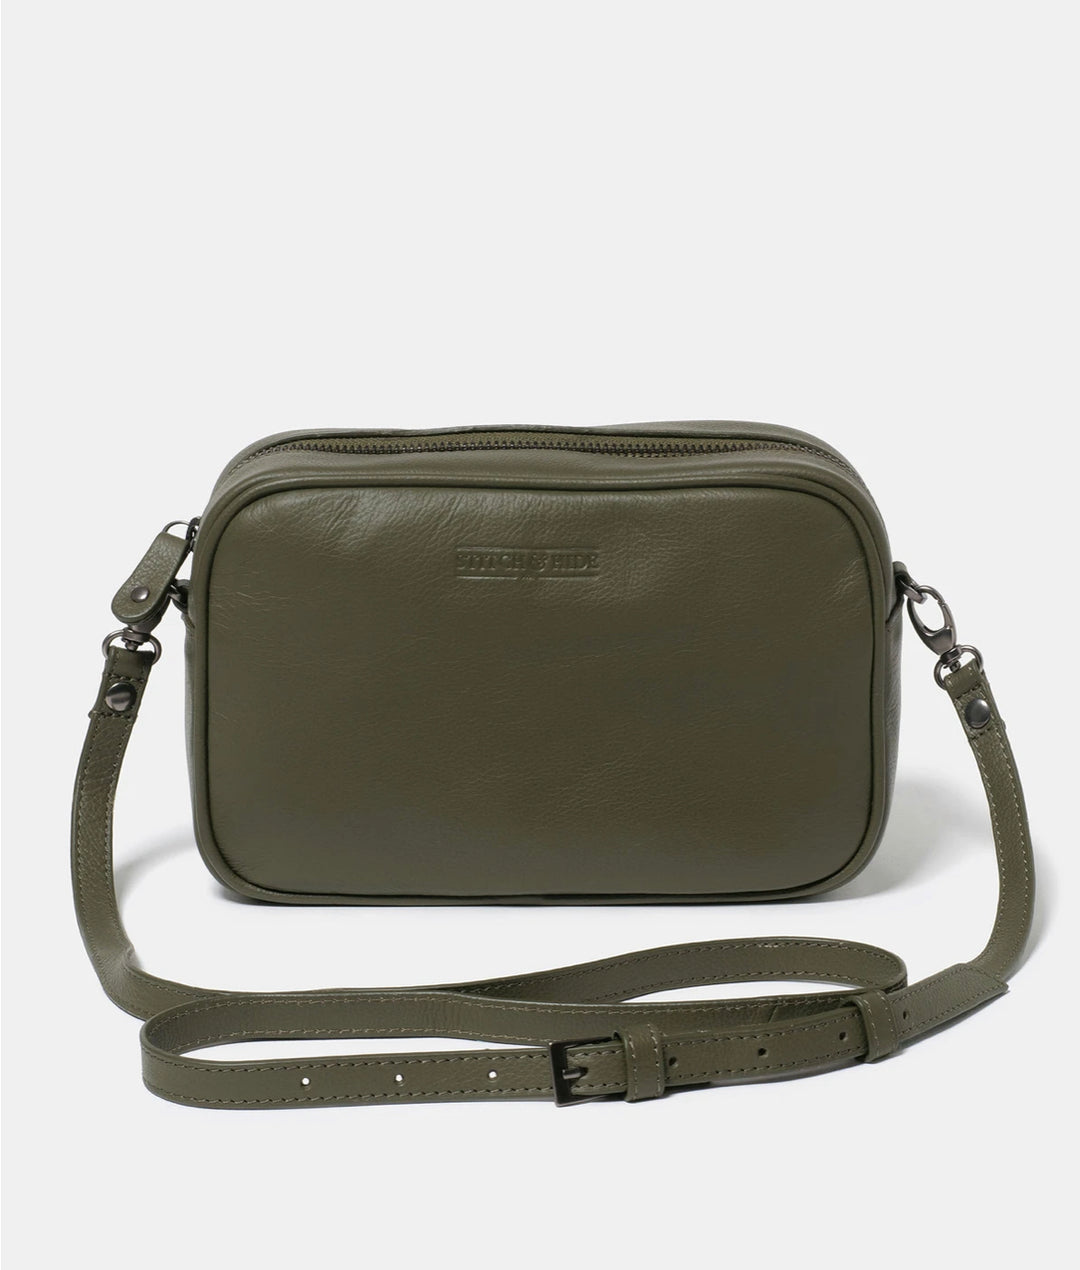 Taylor Bag - 6 Colors available Bags Stitch and Hide Olive  